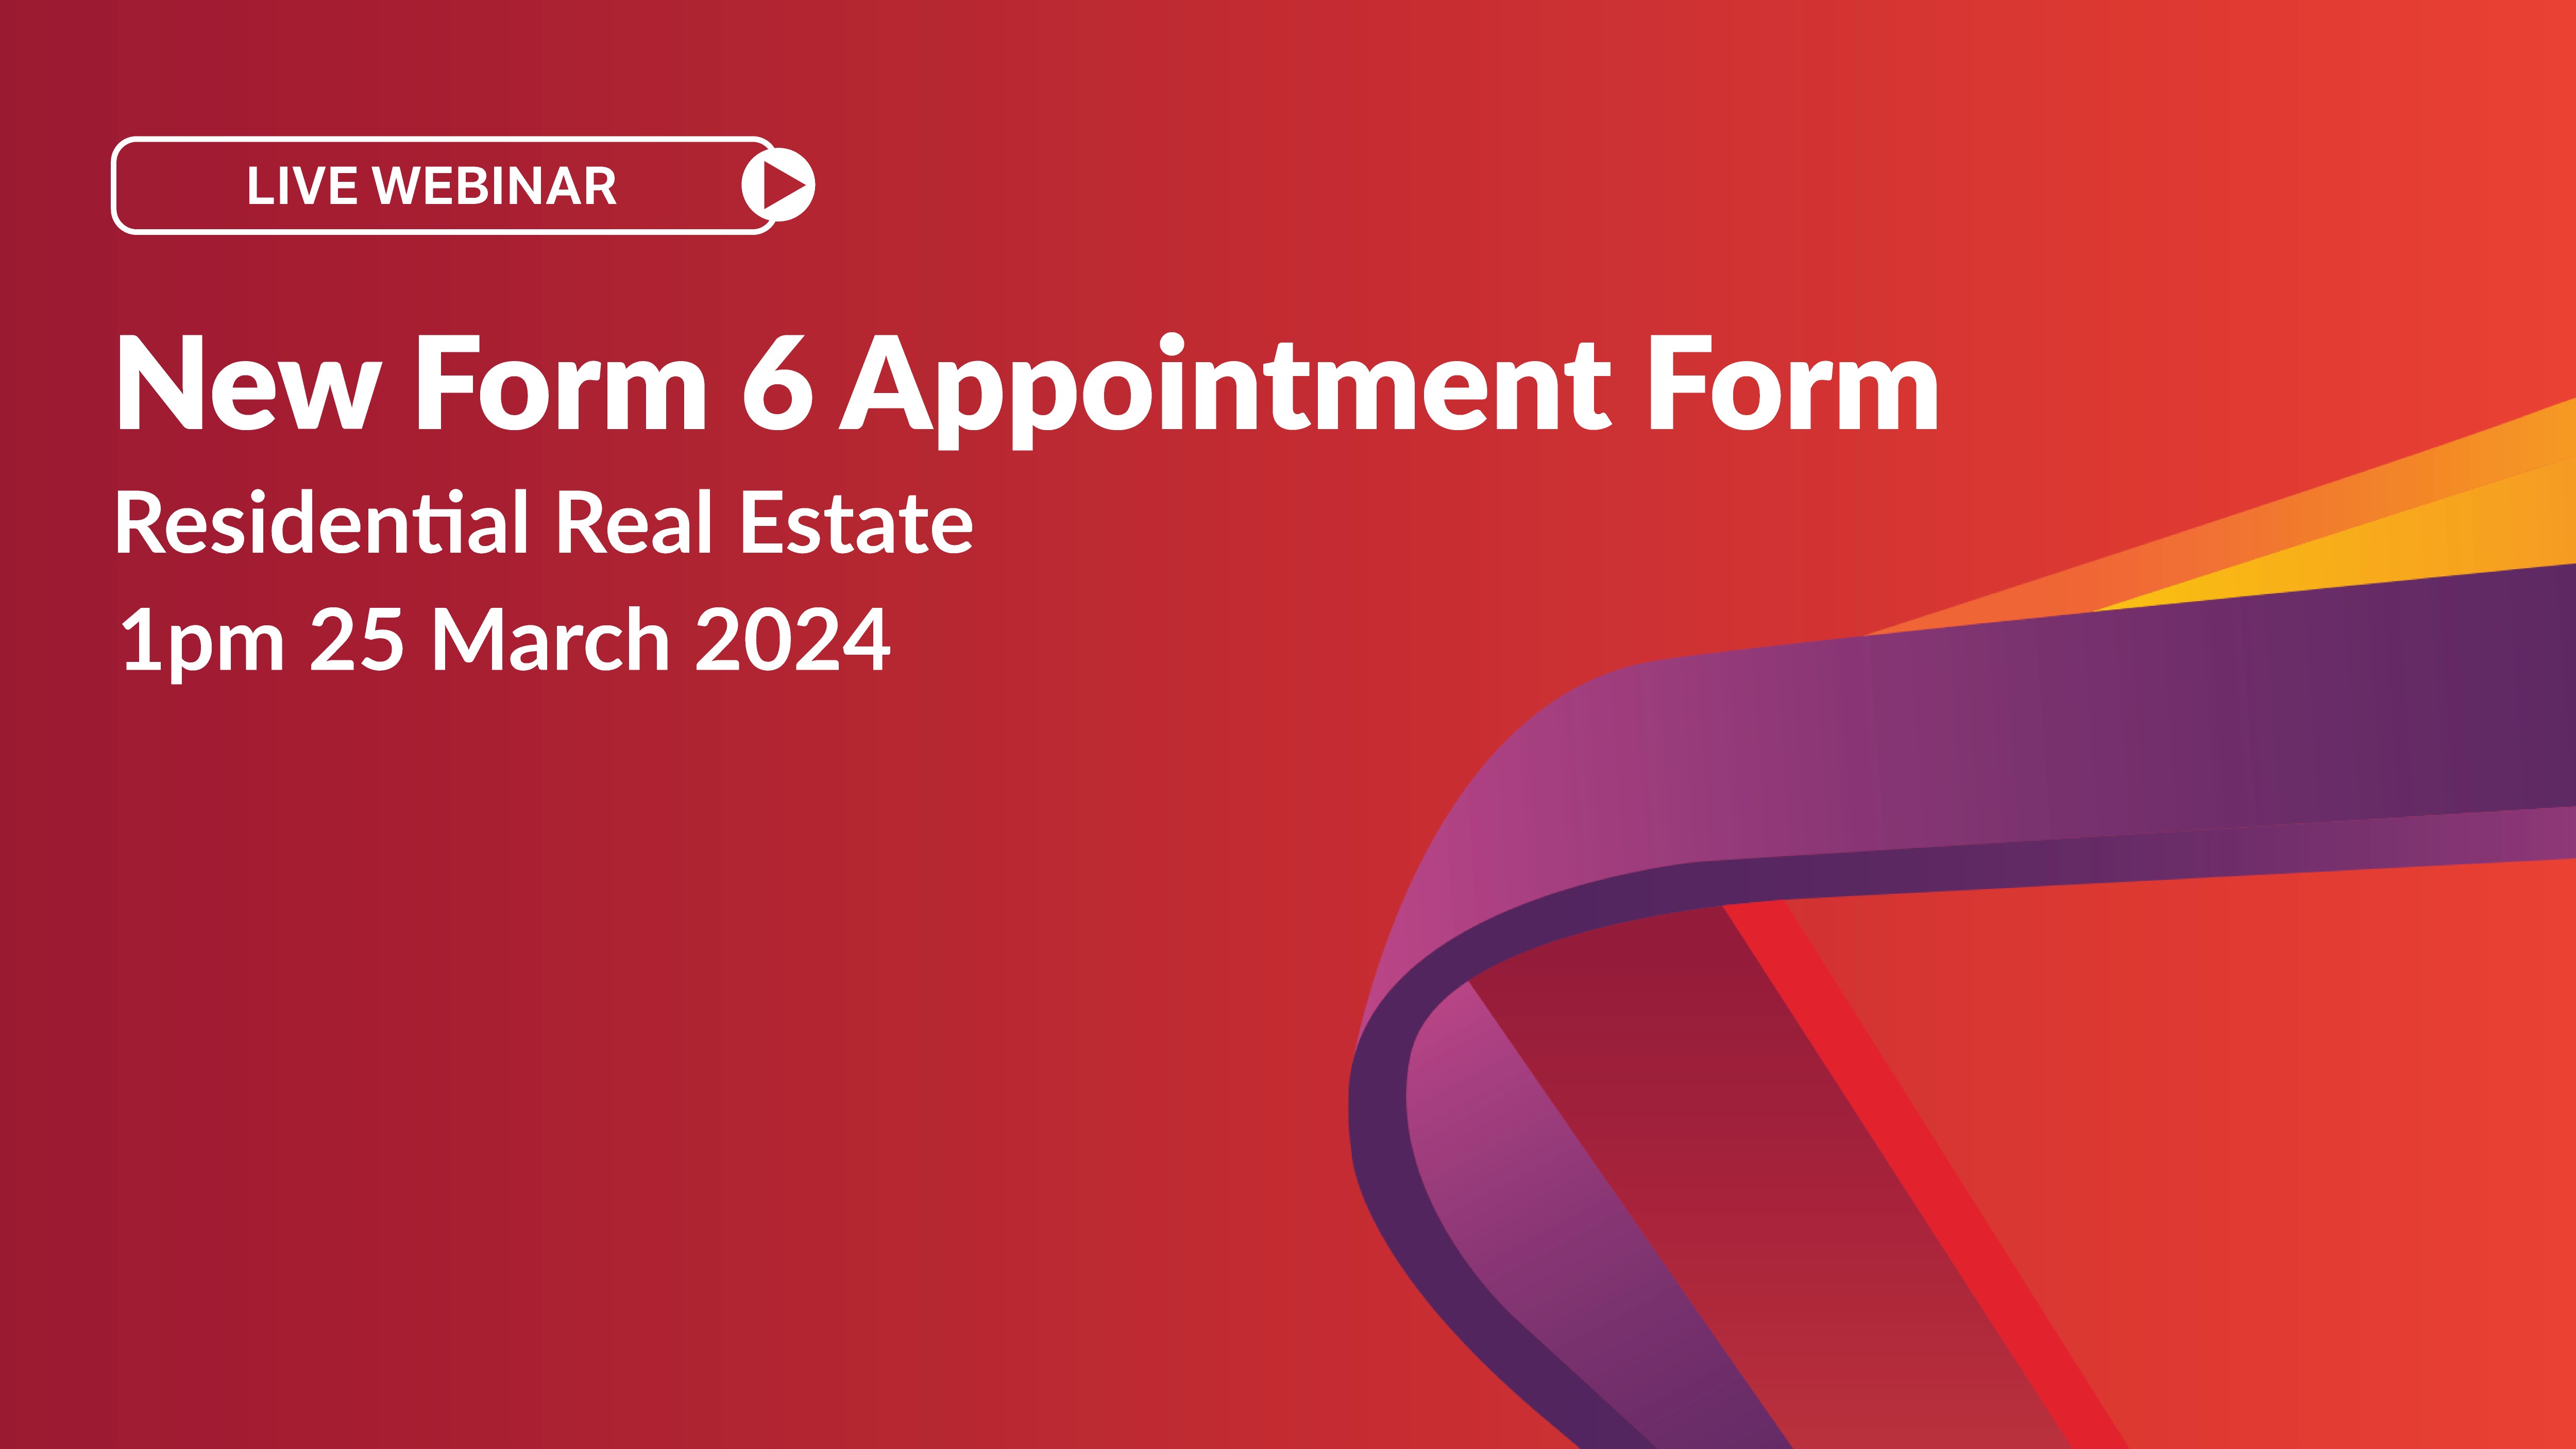 New Form 6 Appointment Form - Residential Real Estate